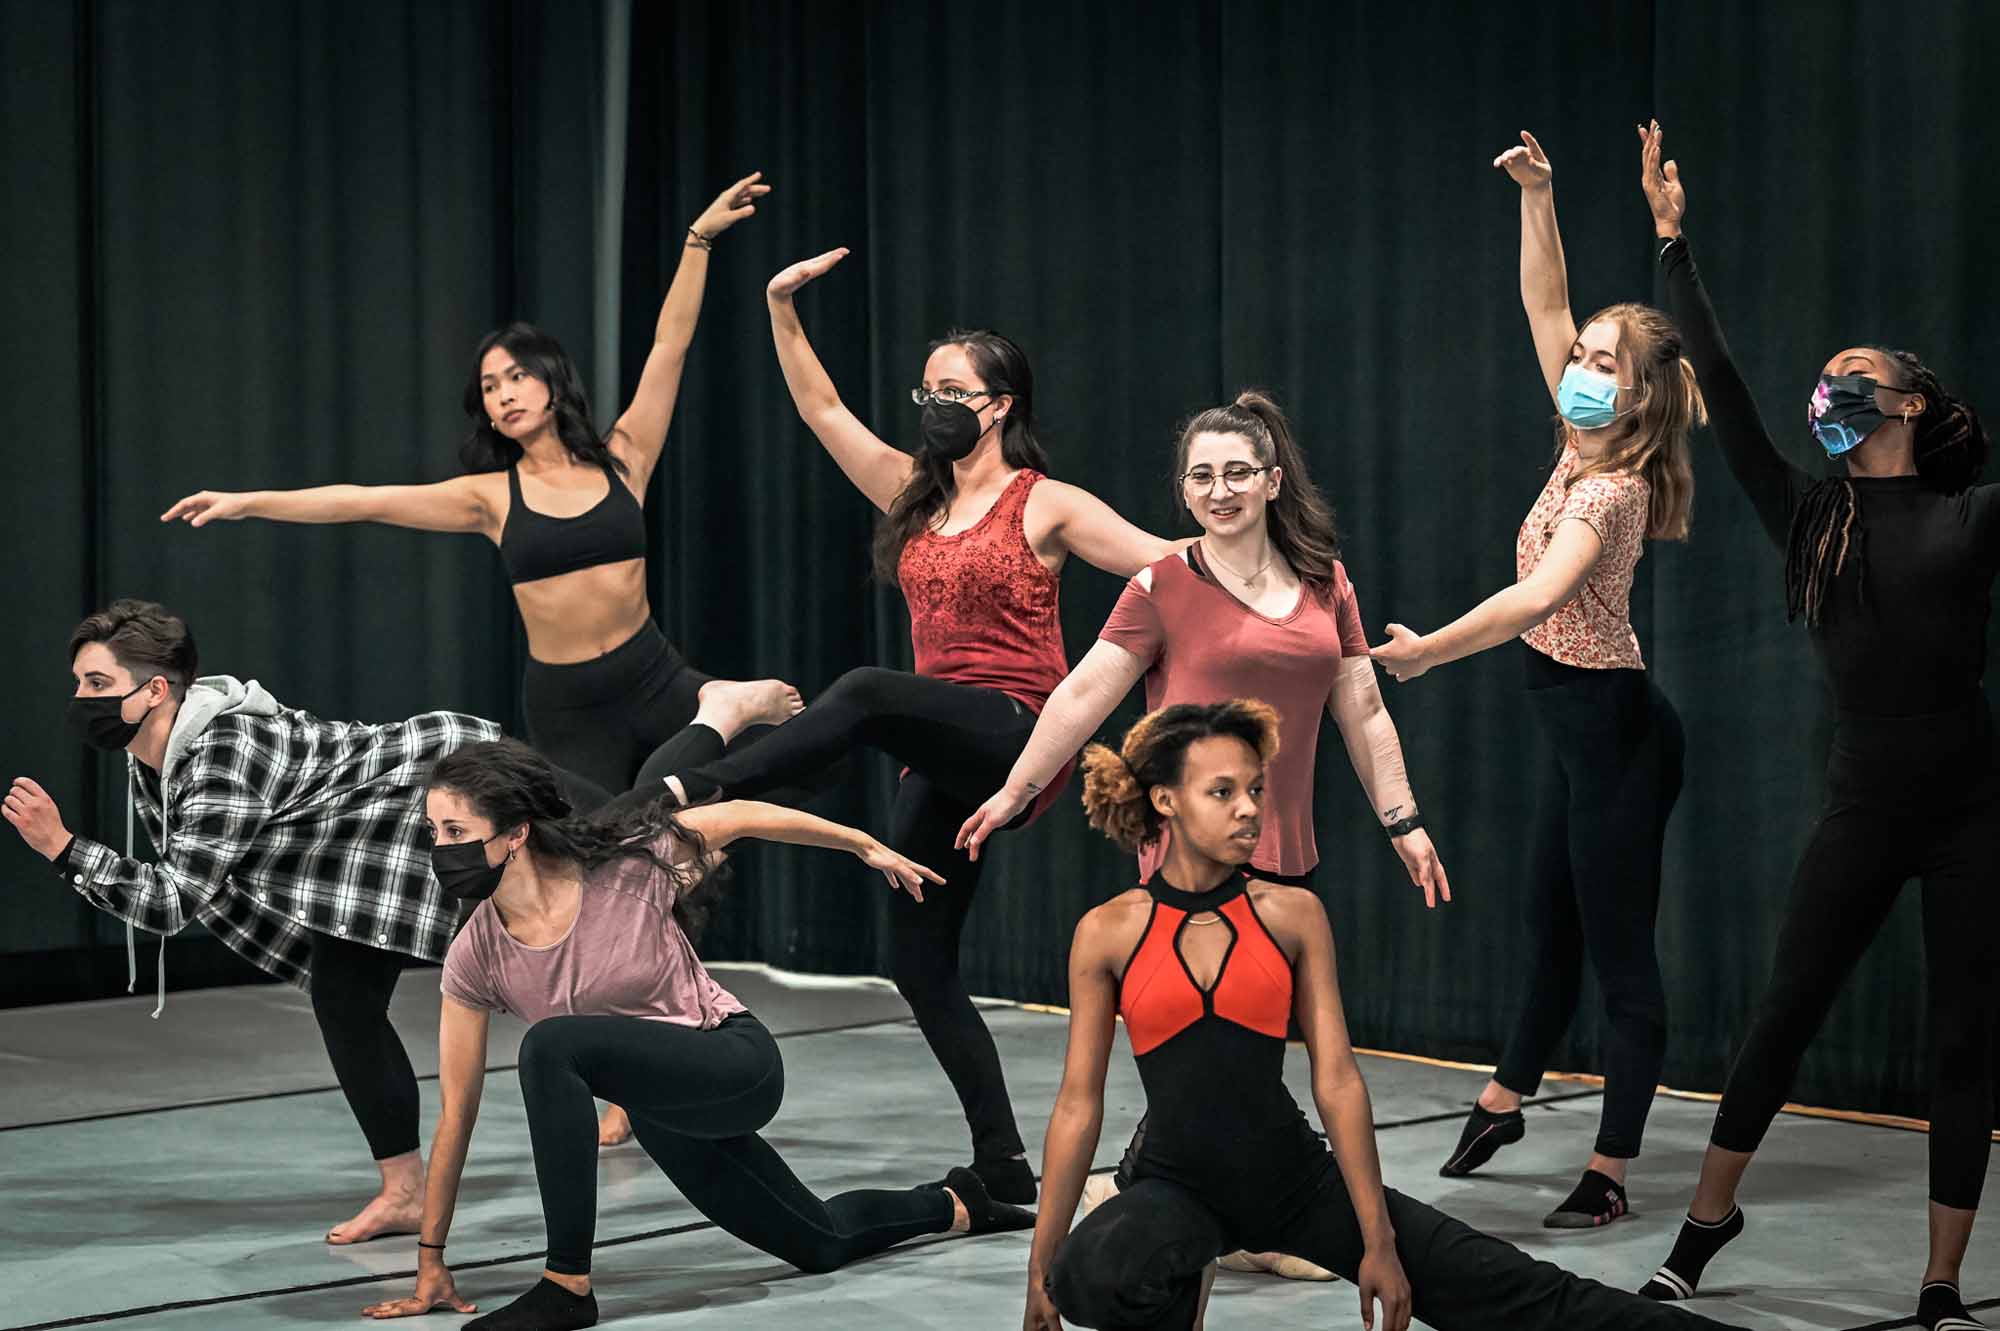 Y(our) Mental Health: A Dance Story Production